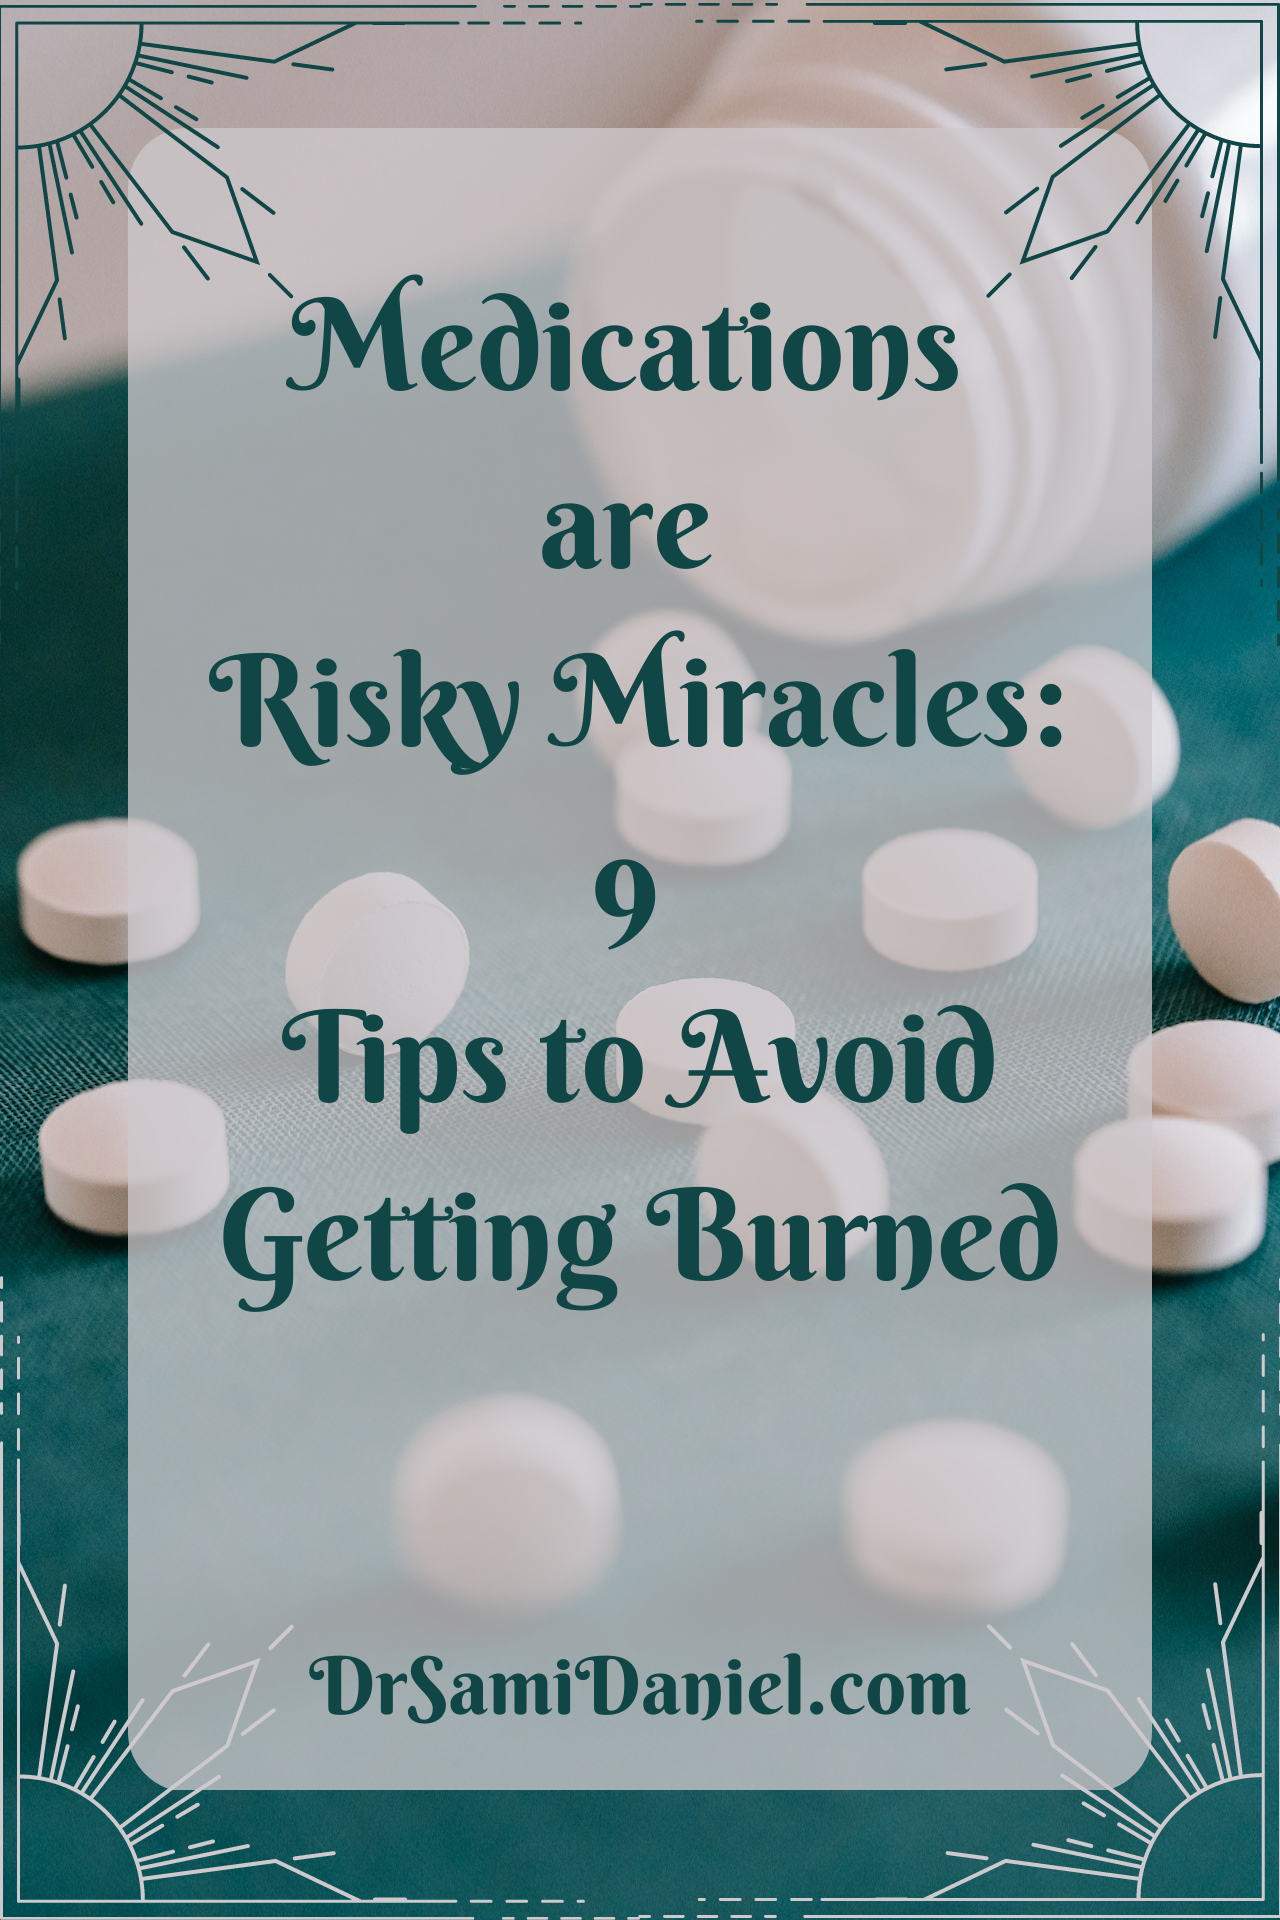 Medications can burn you! Learn how to take your medications on purpose. Learn what you must know to lead a healthy and fulfilling life!